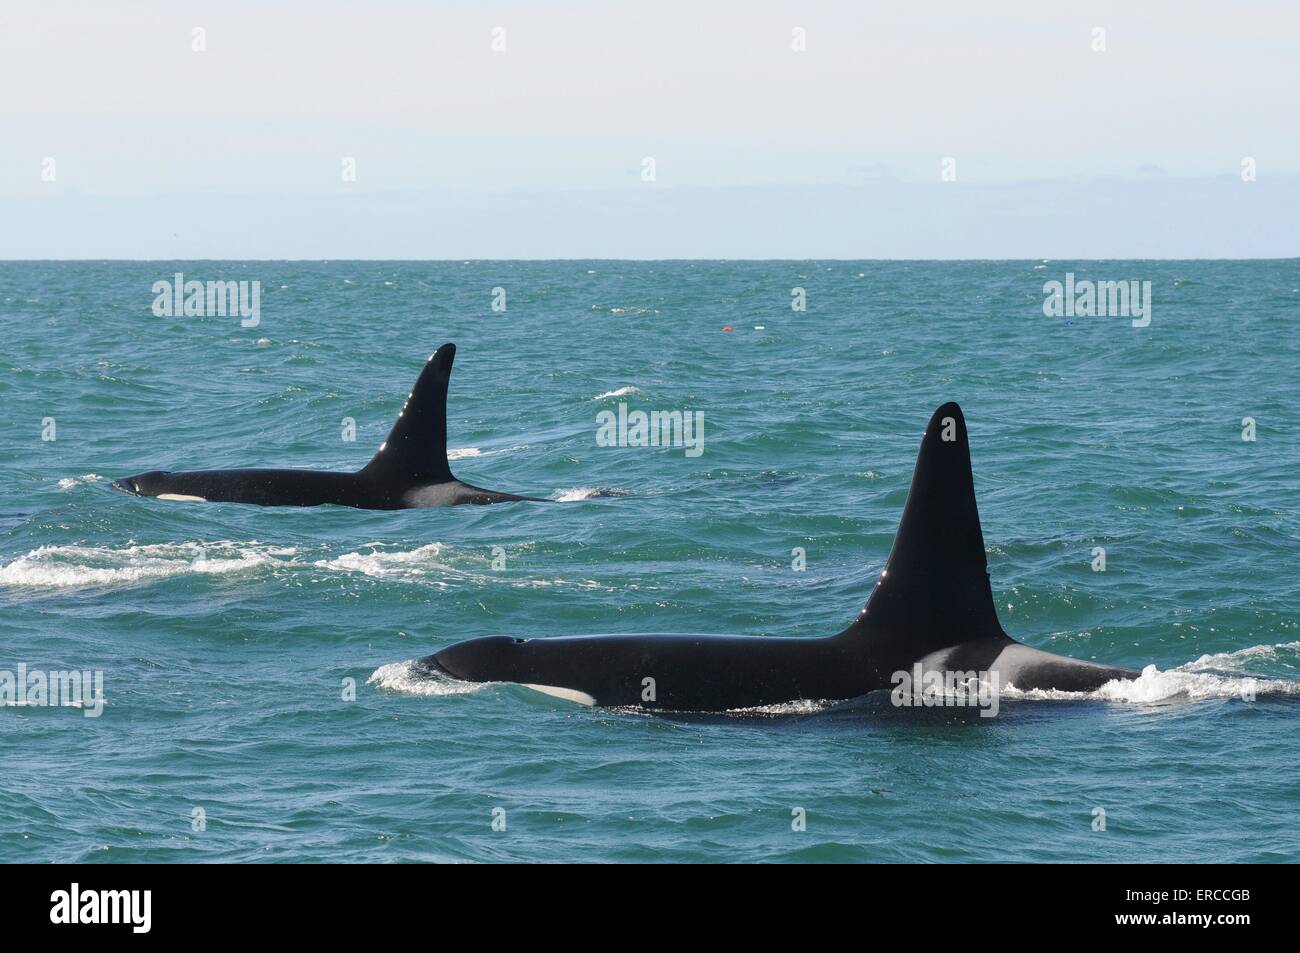 Killer whales swim in a pod during the Southern Resident killer whale survey off the coast of California. Stock Photo